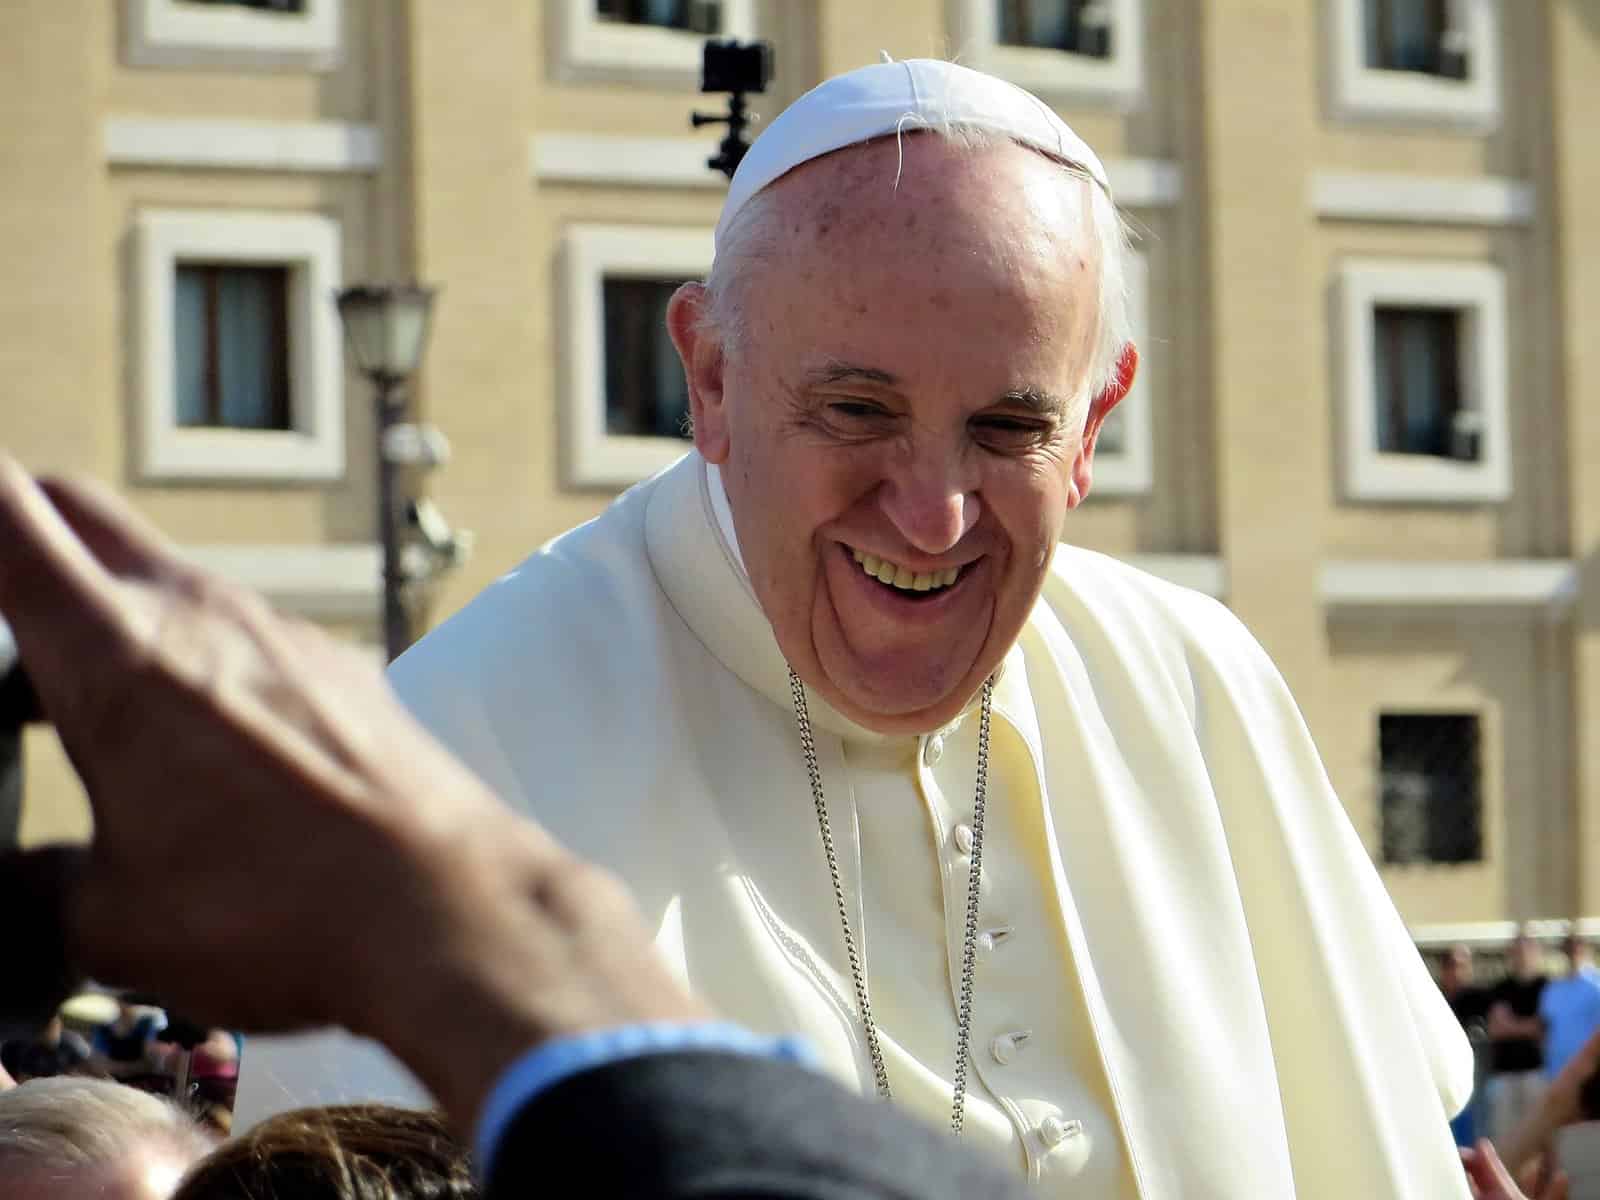 Pope Francis is shown outside facing a crowd and smiling.